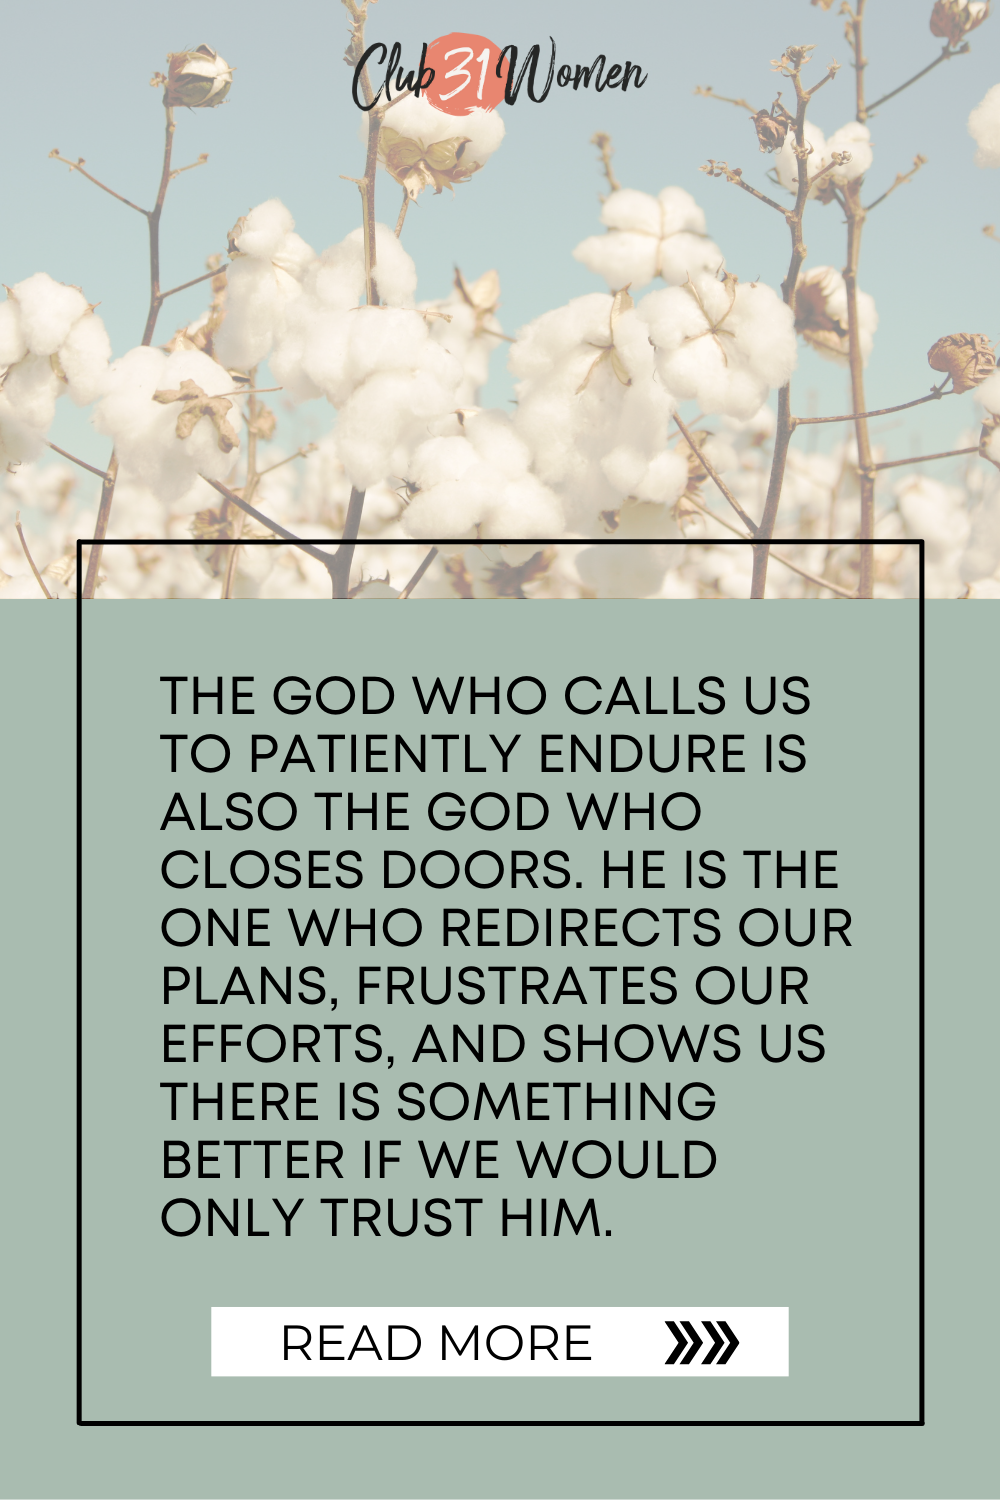 The God who calls us to patiently endure is also the God who closes doors. He is the One who redirects our plans. There is something better if we trust Him. via @Club31Women